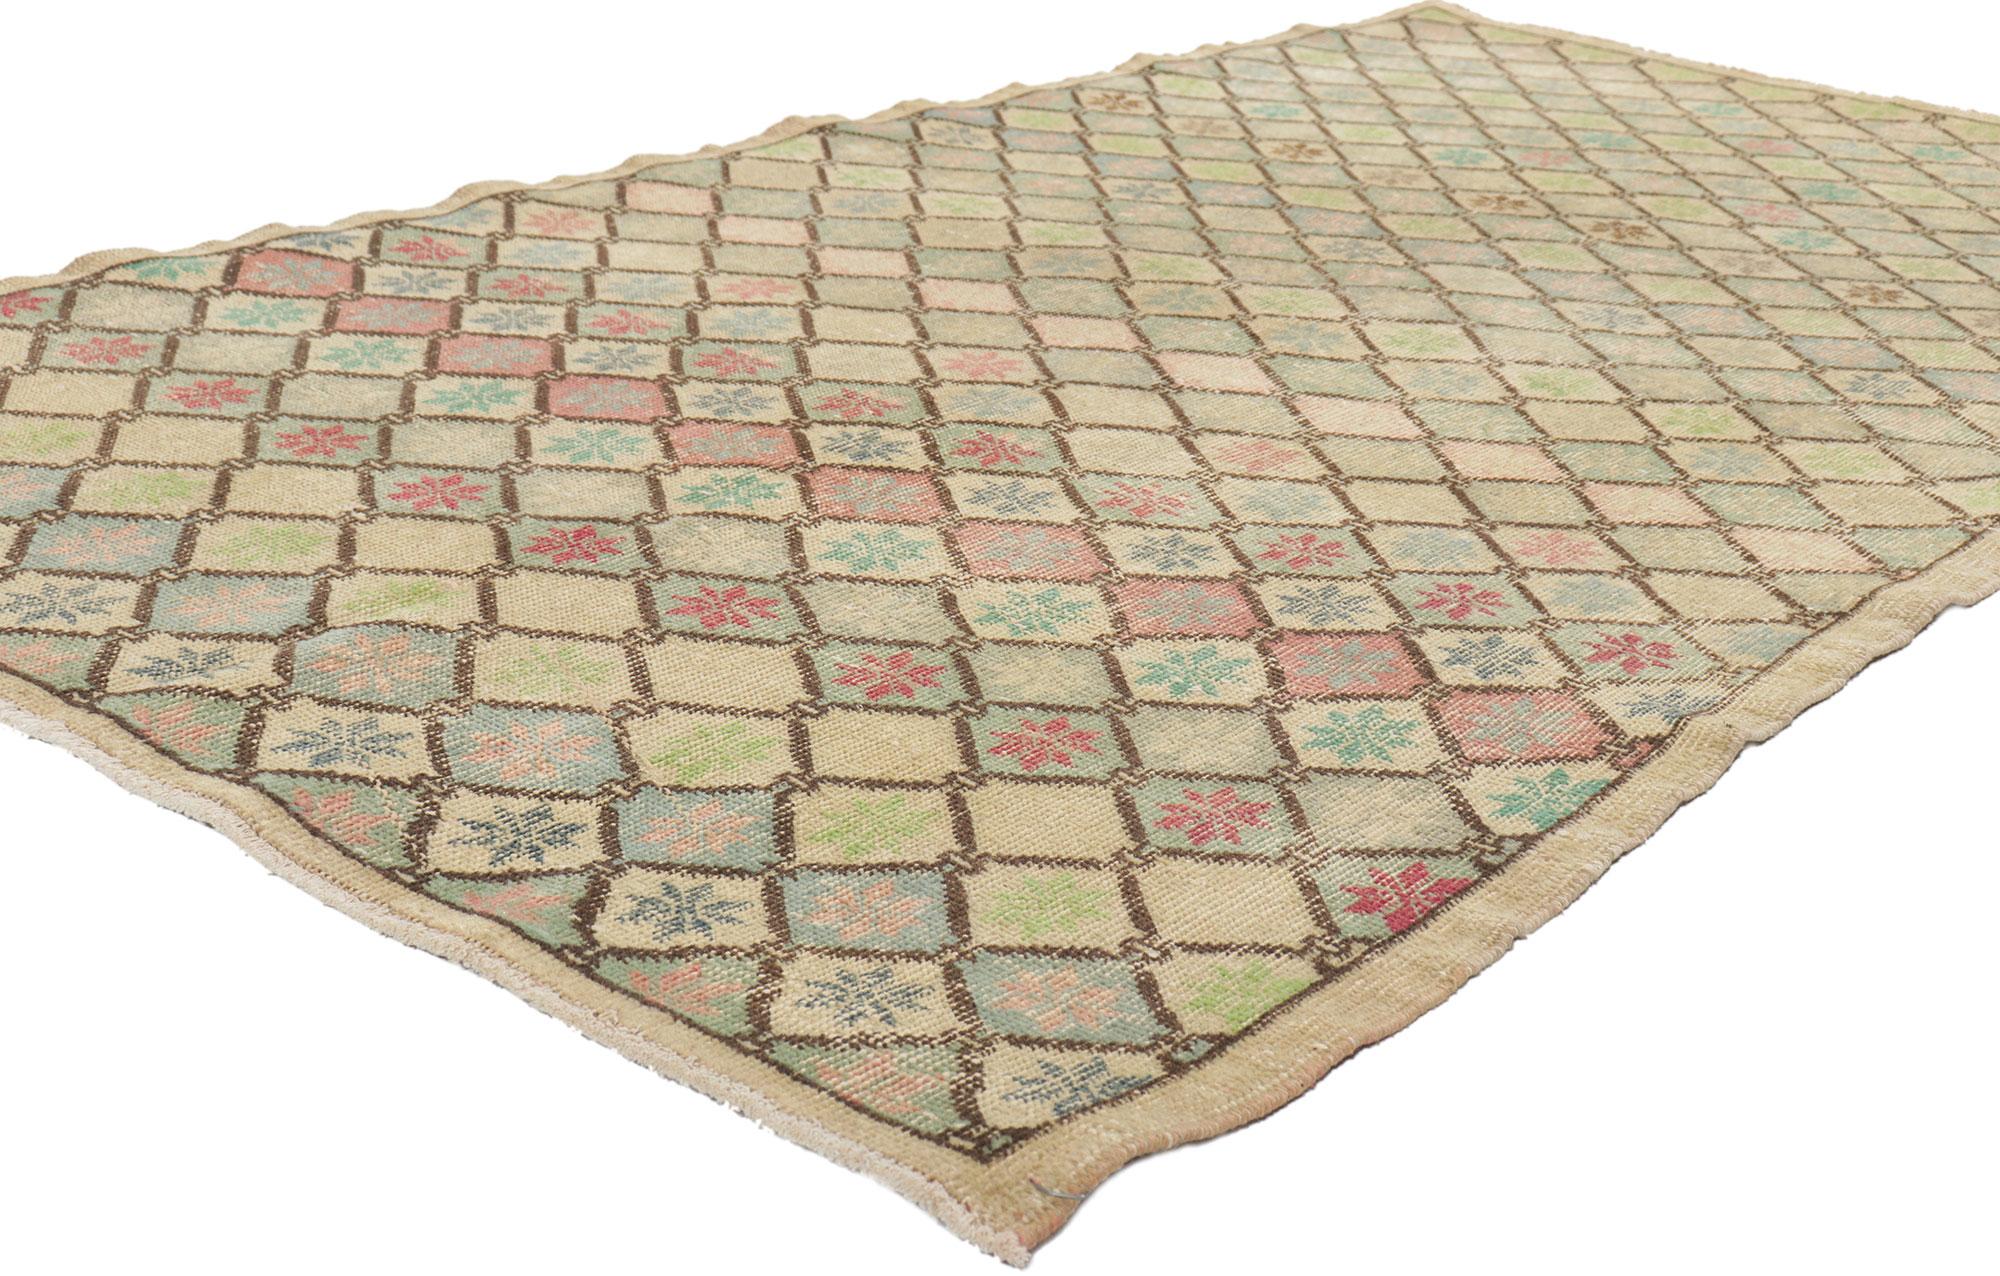 51003 Distressed Vintage Turkish Sivas Rug, 04'00 X 07'07.
Vintage charm meets rustic elegance in this hand kotted distressed Turkish Sivas rug. The faded allover pattern and pastel earth-tone colors woven into this piece work together creating a